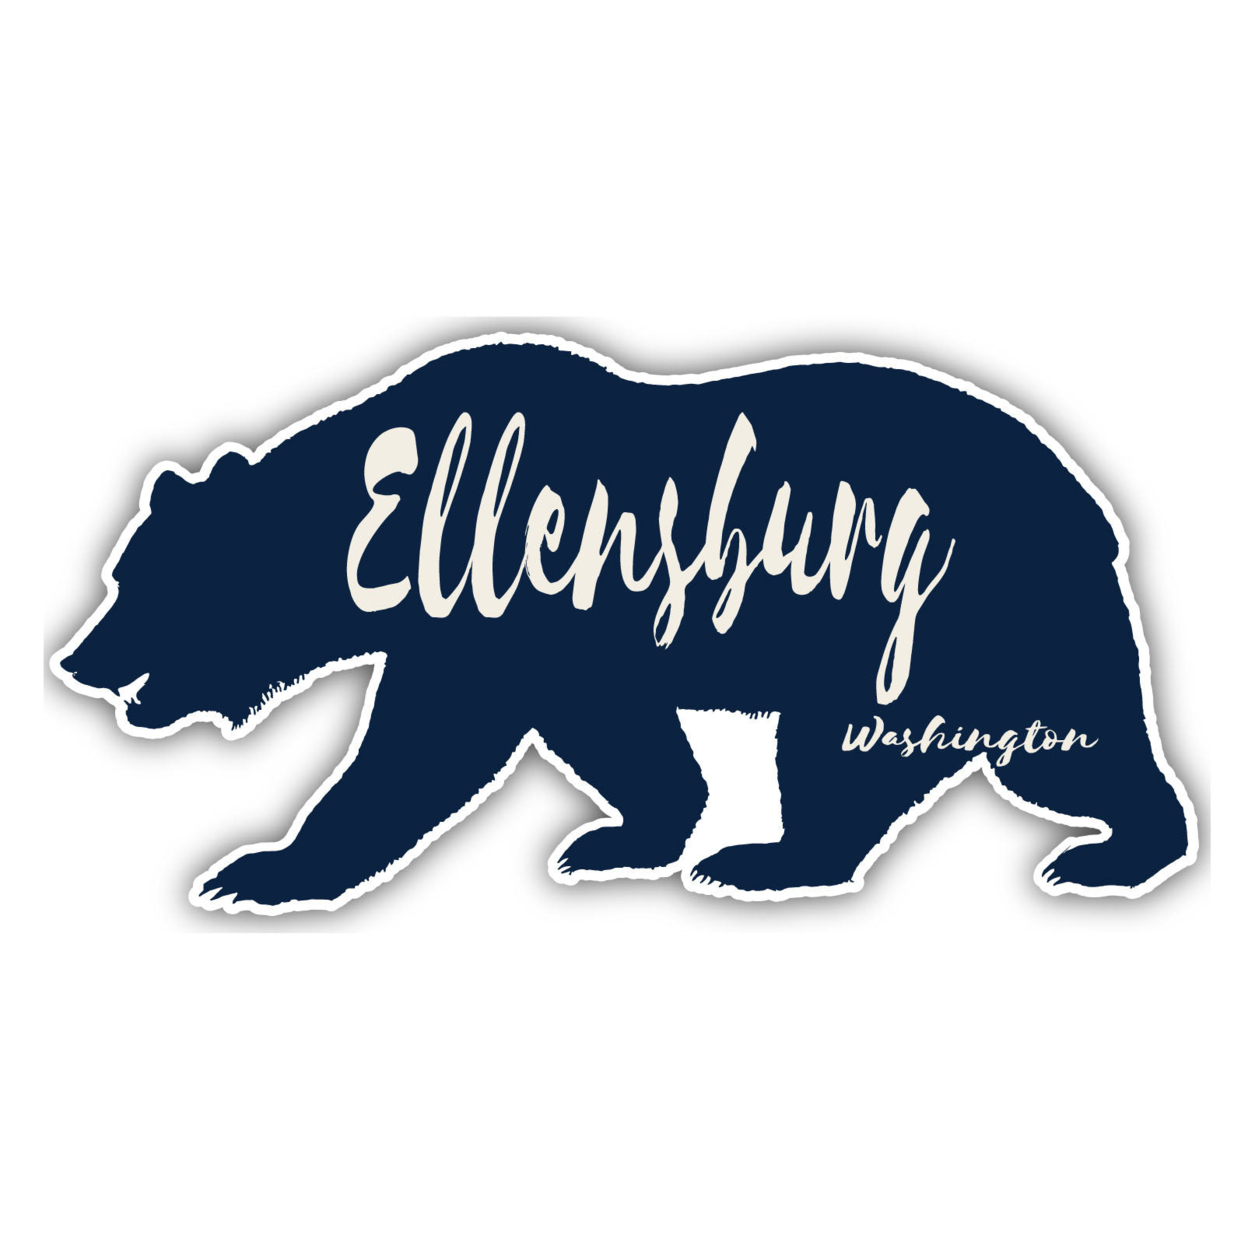 Ellensburg Washington Souvenir Decorative Stickers (Choose Theme And Size) - 4-Pack, 12-Inch, Great Outdoors